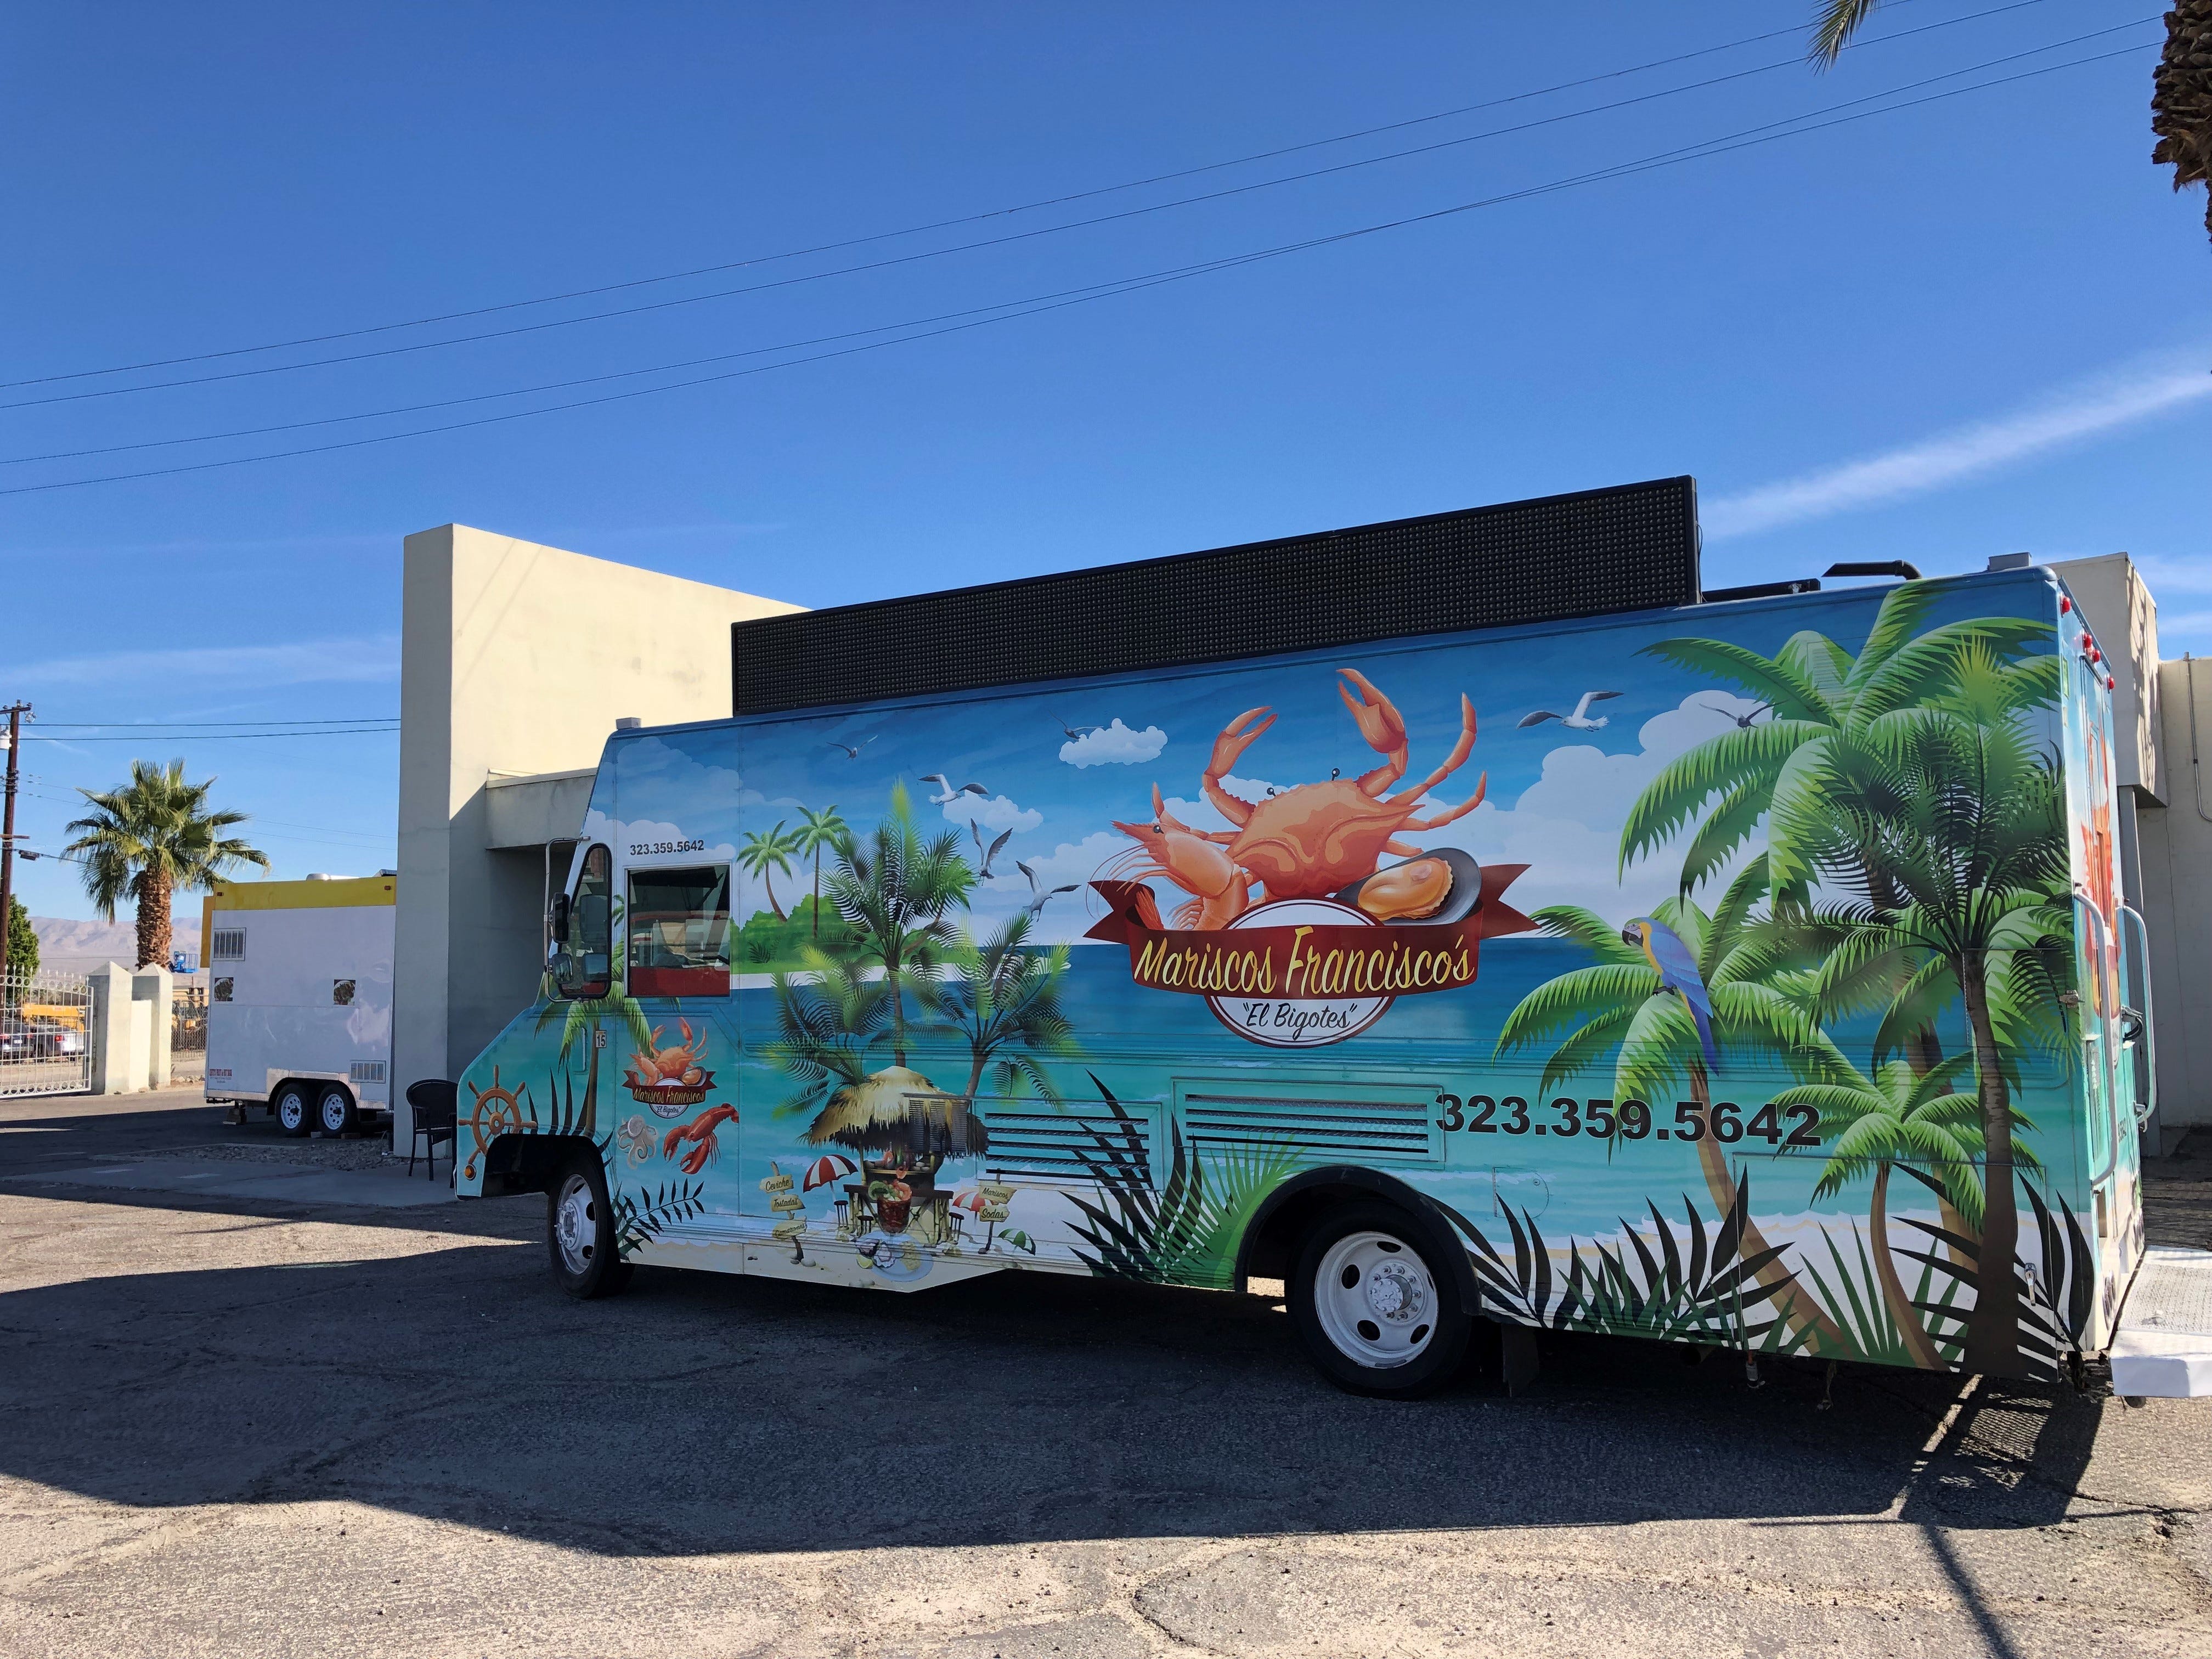 Food truck commissary in Indio hopes to spur more food trucks